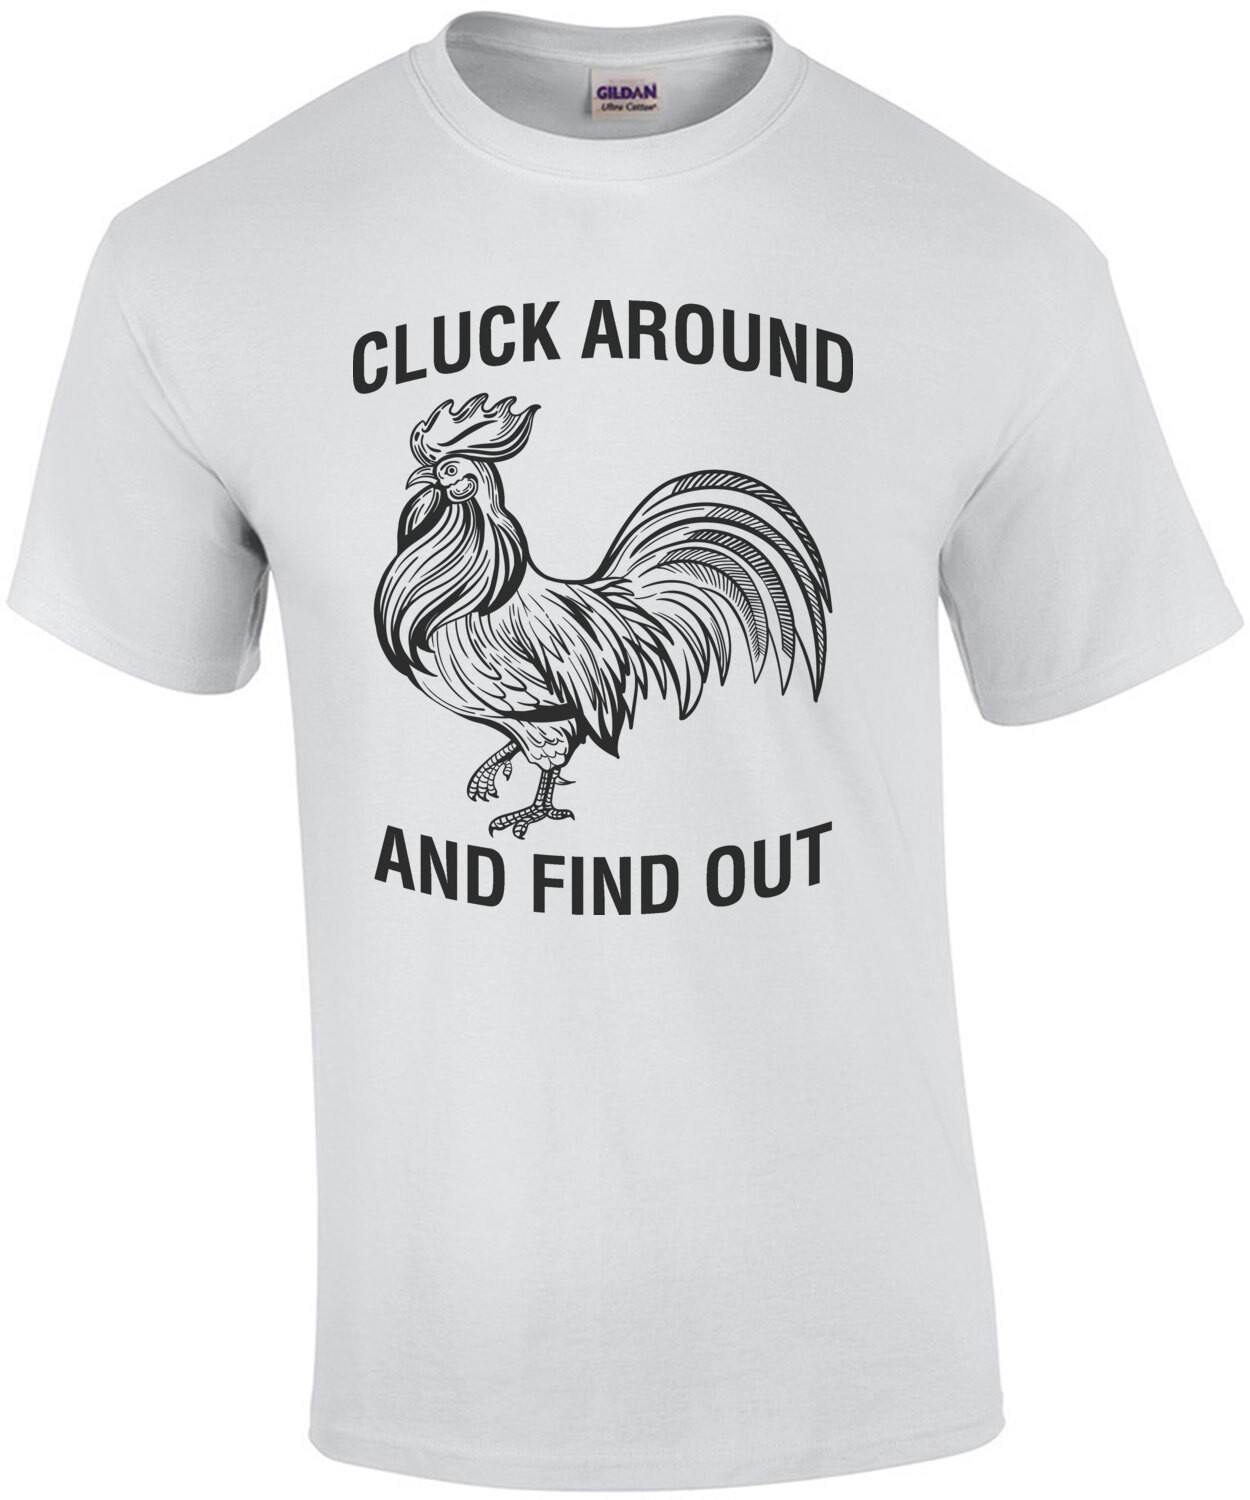 Cluck Around And Find Out Shirt